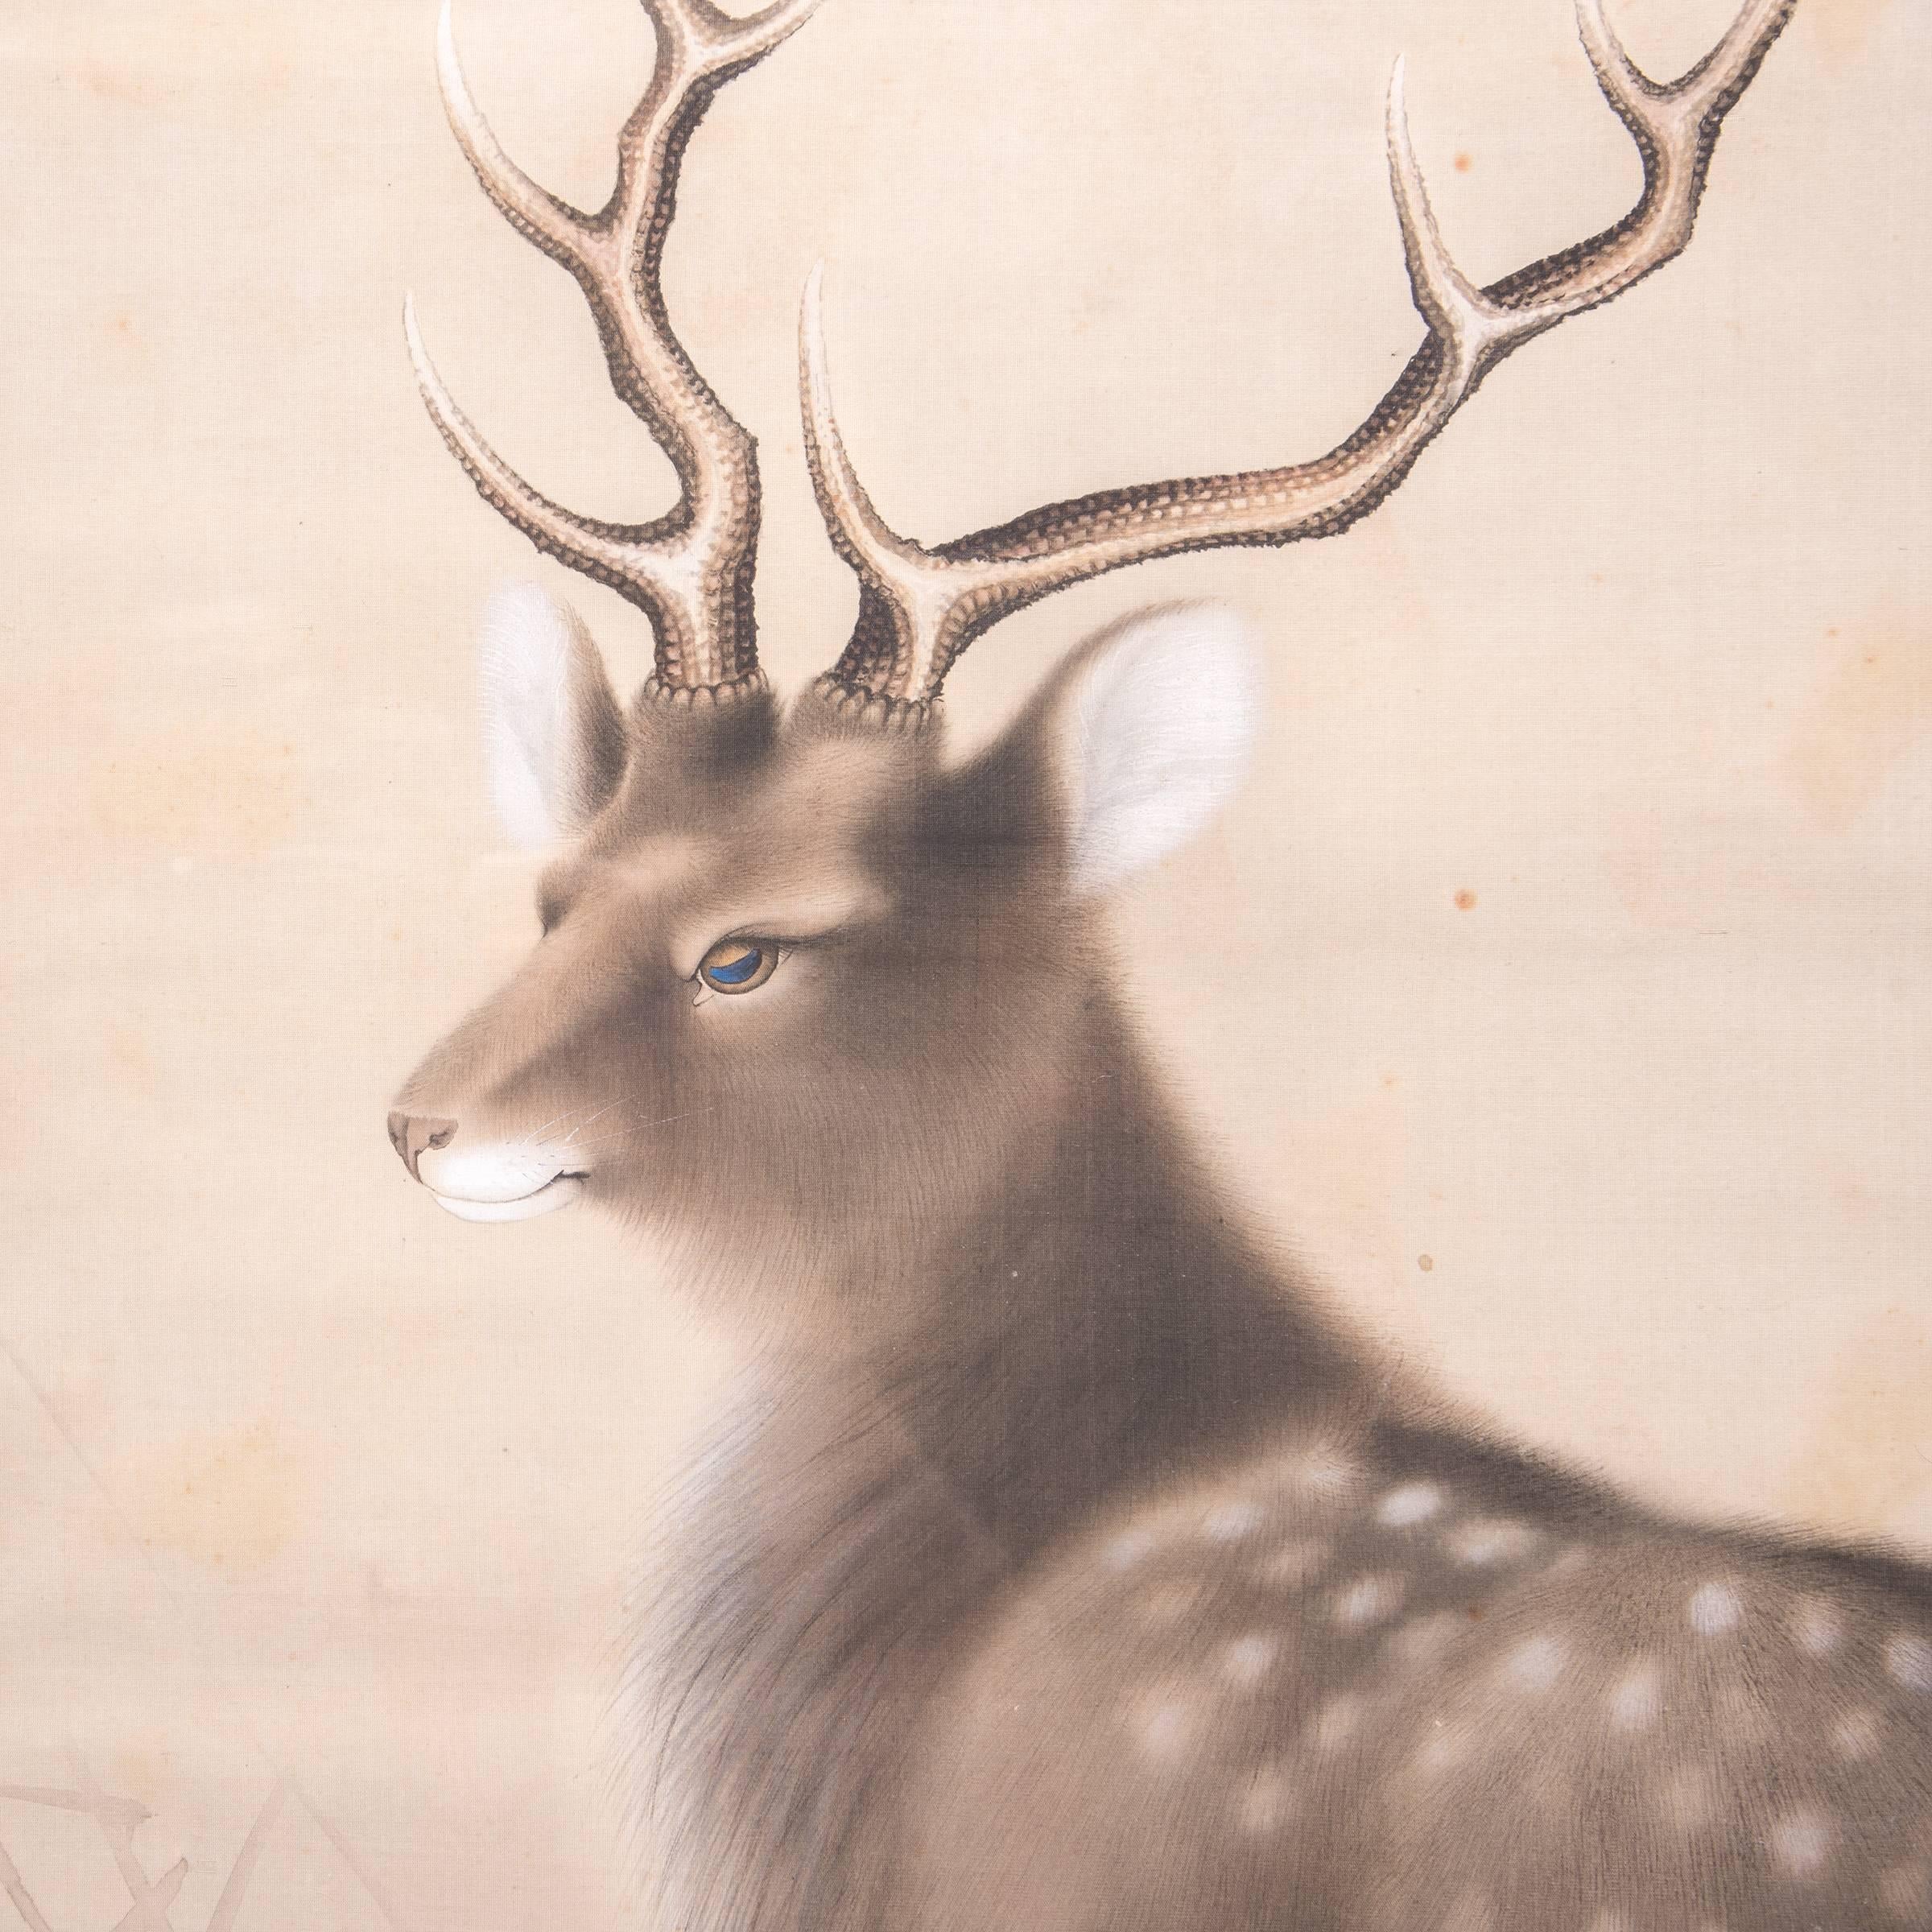 Chinese scholars used natural imagery and scenery to aid in contemplation within the walls of their studios. The inherent meaning carried by animals and natural forms inspired clear and concise thinking. In the case of this scroll, the deer is